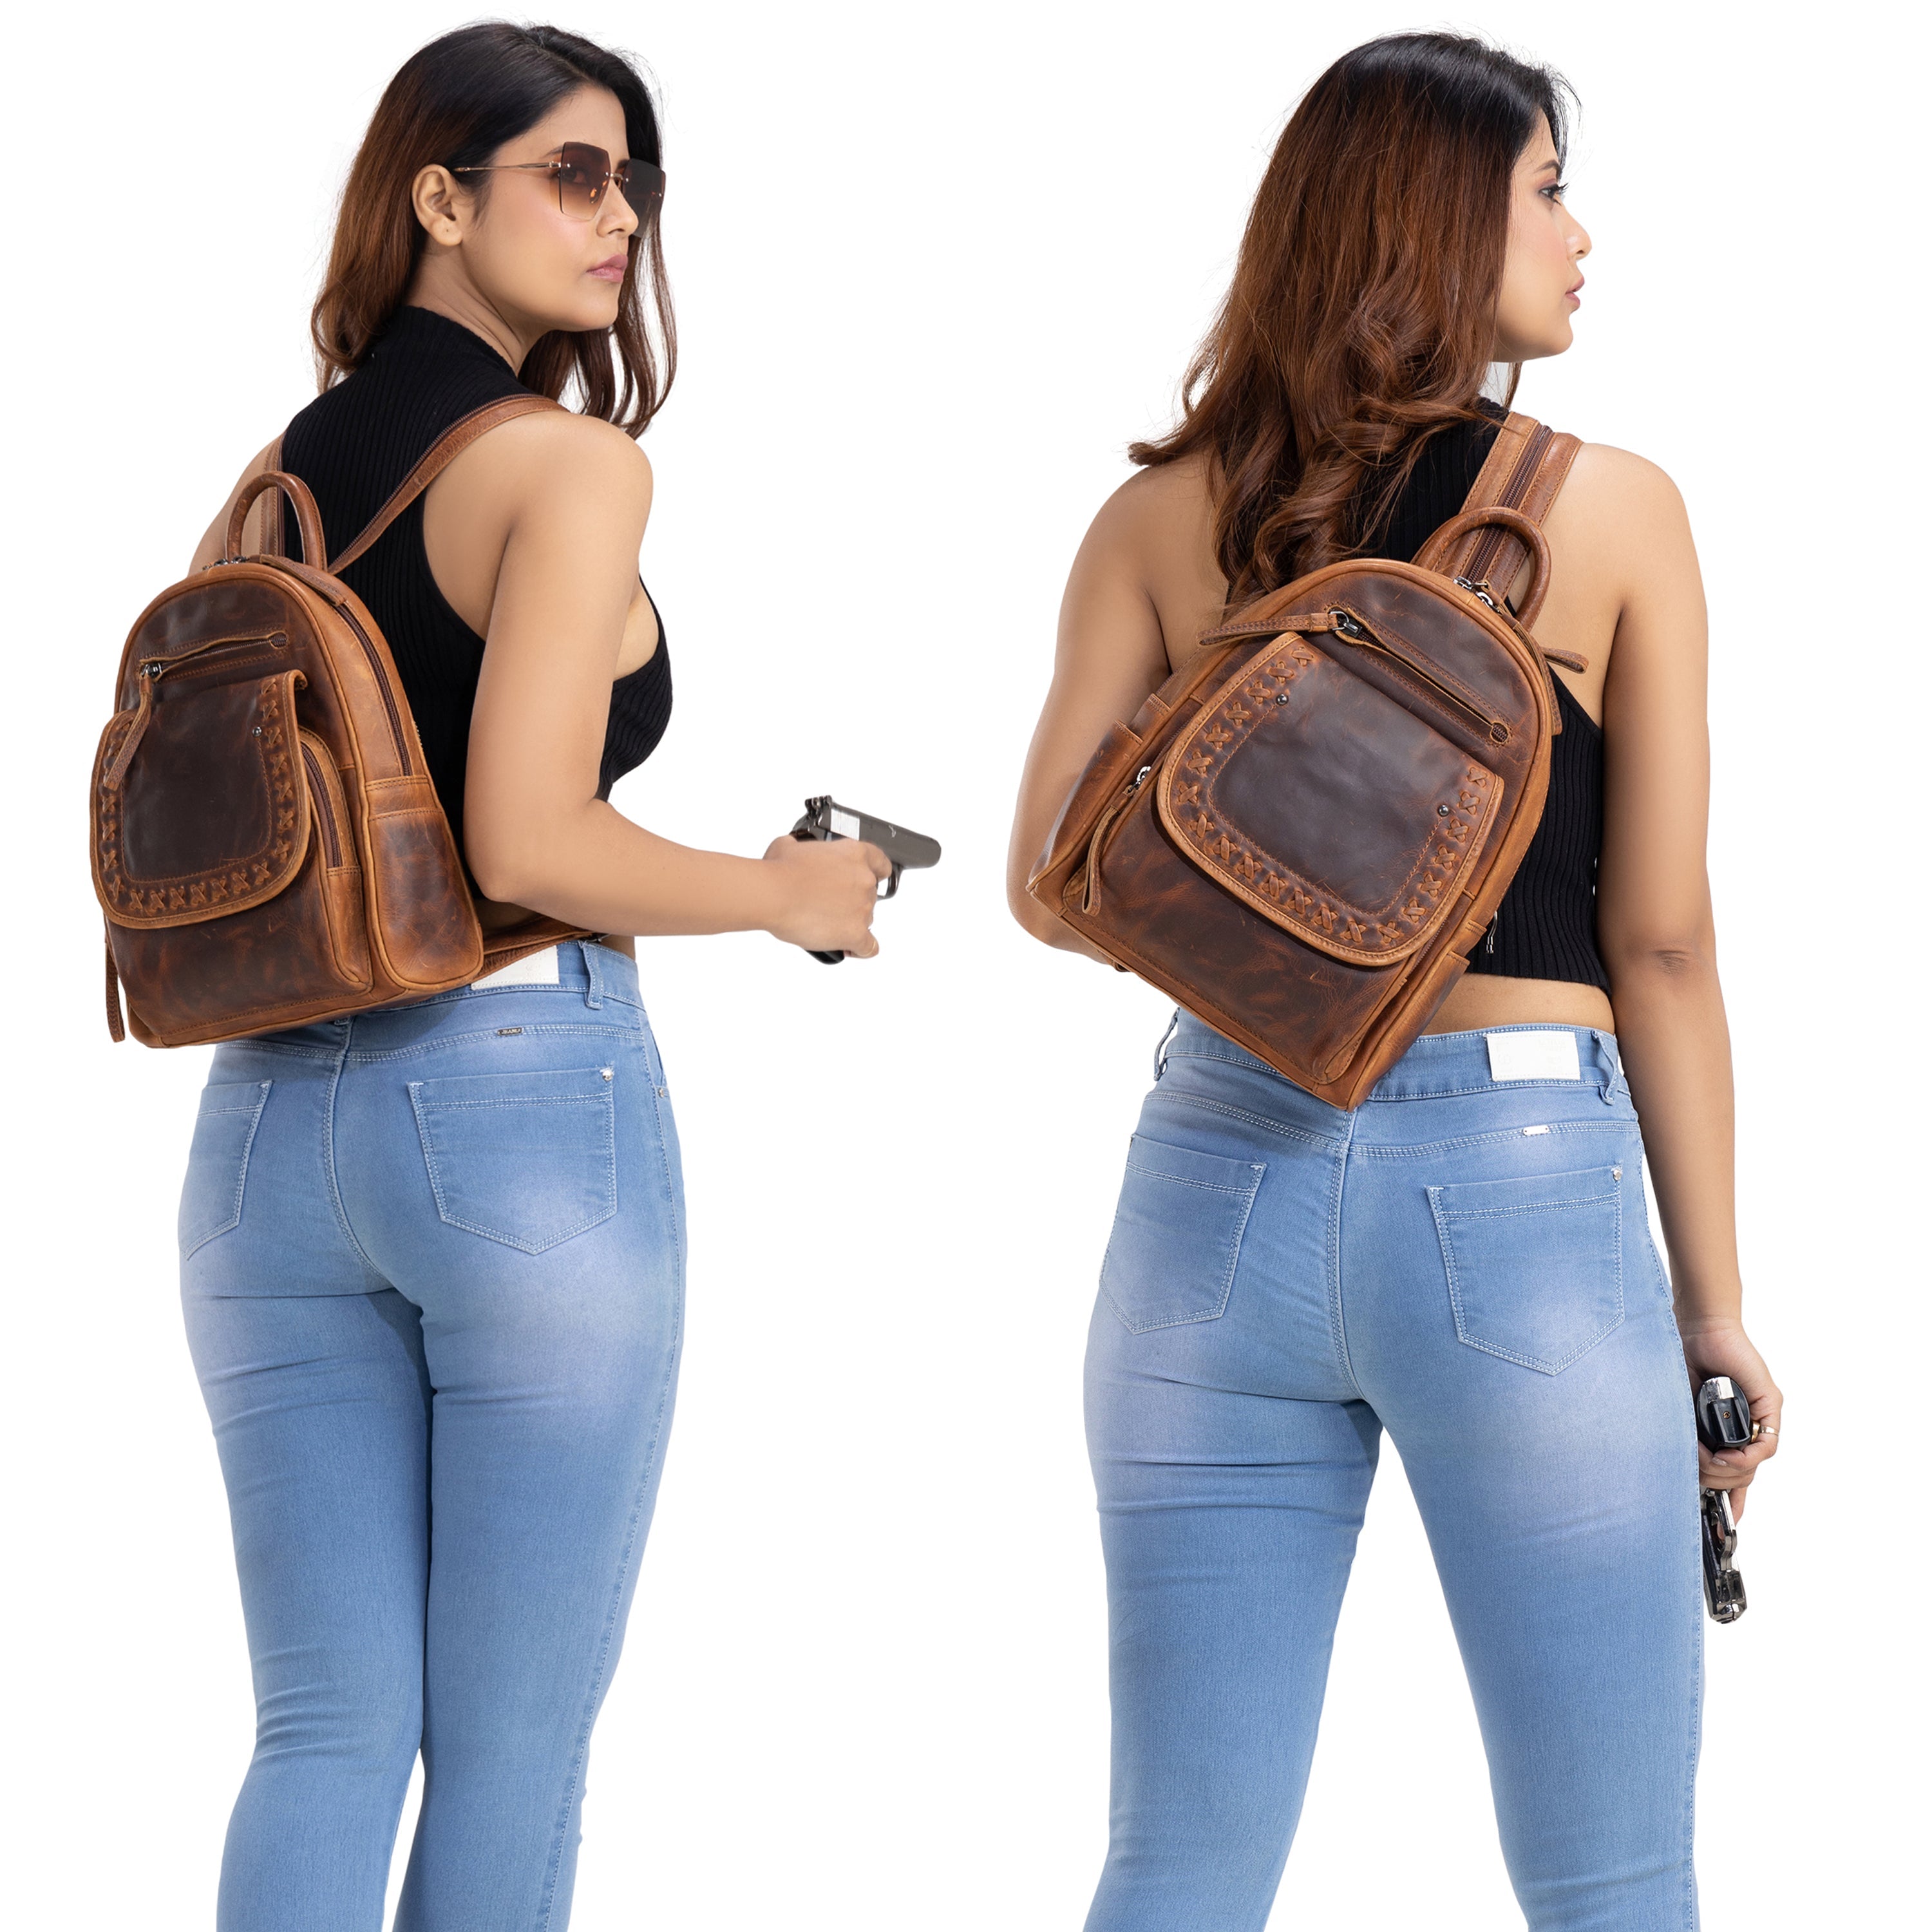 Concealed Carry RFID Daisy Leather Backpack - Locking Concealment Bag for Pistol - Outdoors Gun Bag - Women's Conceal Carry Purse for Firearm - Gift for Gun Owner - Gift for Women with Guns - Gifts for Hunters - Pistol Gun Backpack - Leather Gun Bag - Bag for Glock